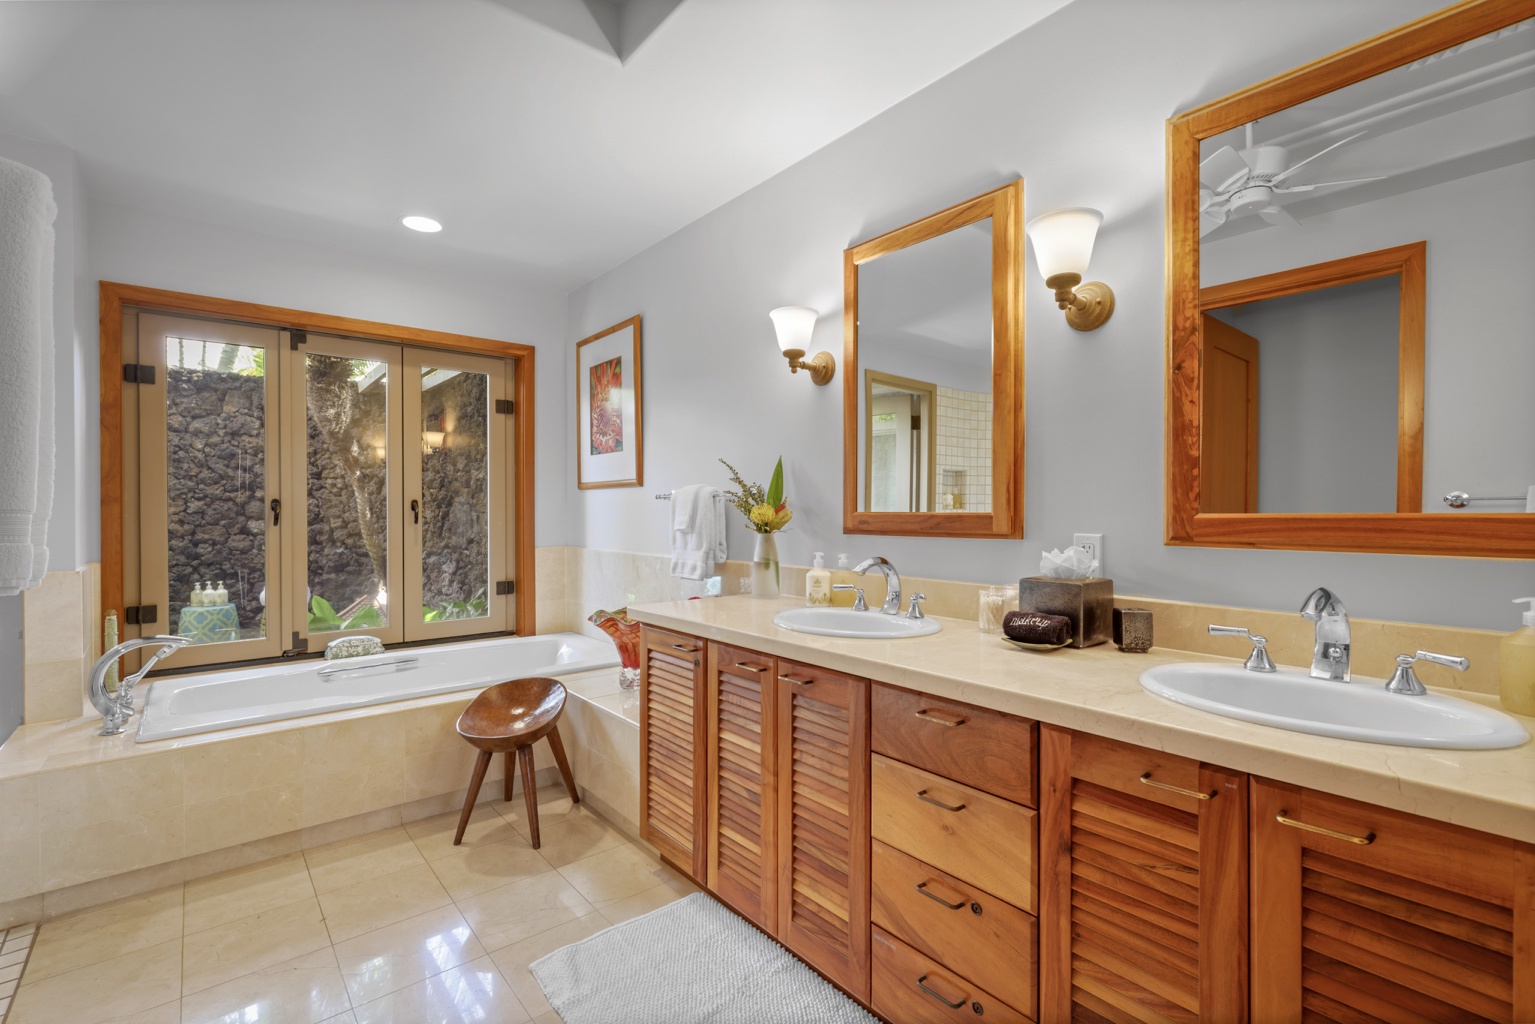 Kailua Kona Vacation Rentals, 3BD Golf Villa (3101) at Four Seasons Resort at Hualalai - Deluxe primary bath w/oversized soaking tub, separate walk-in shower & tropical outdoor shower.